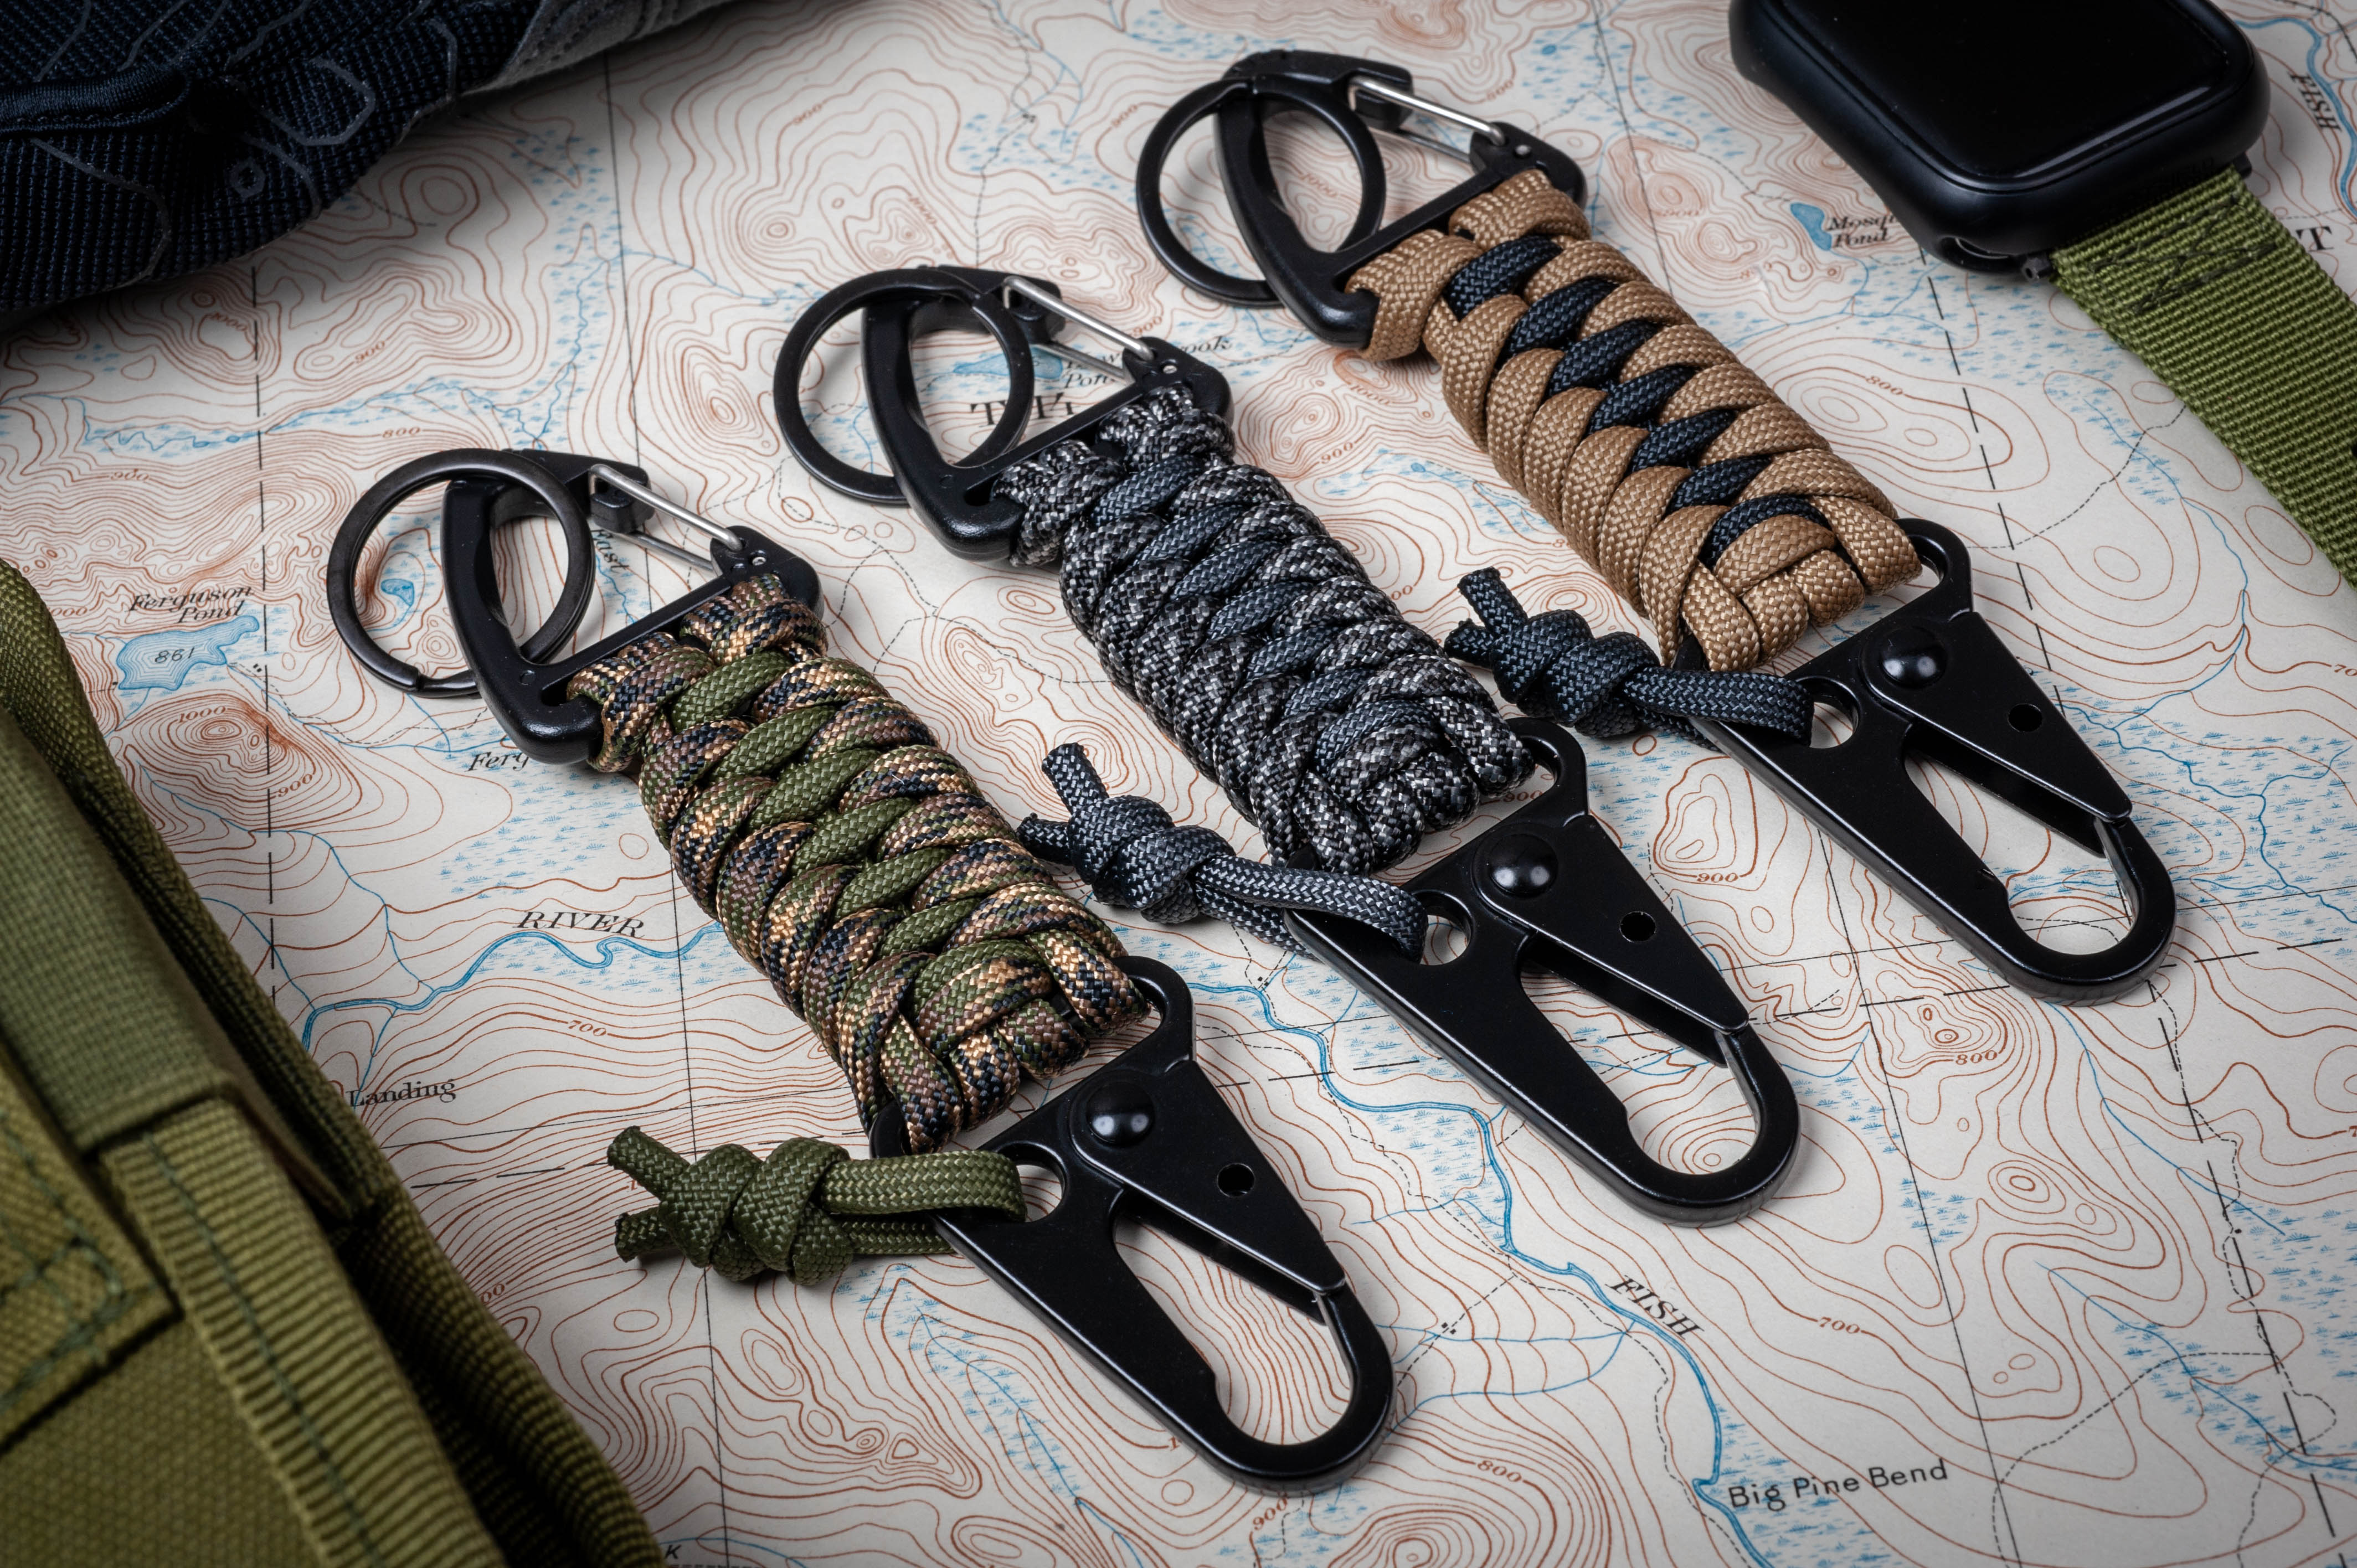 Tactical Paracord HK Hook and Triangle Carabiner EDC Keychain